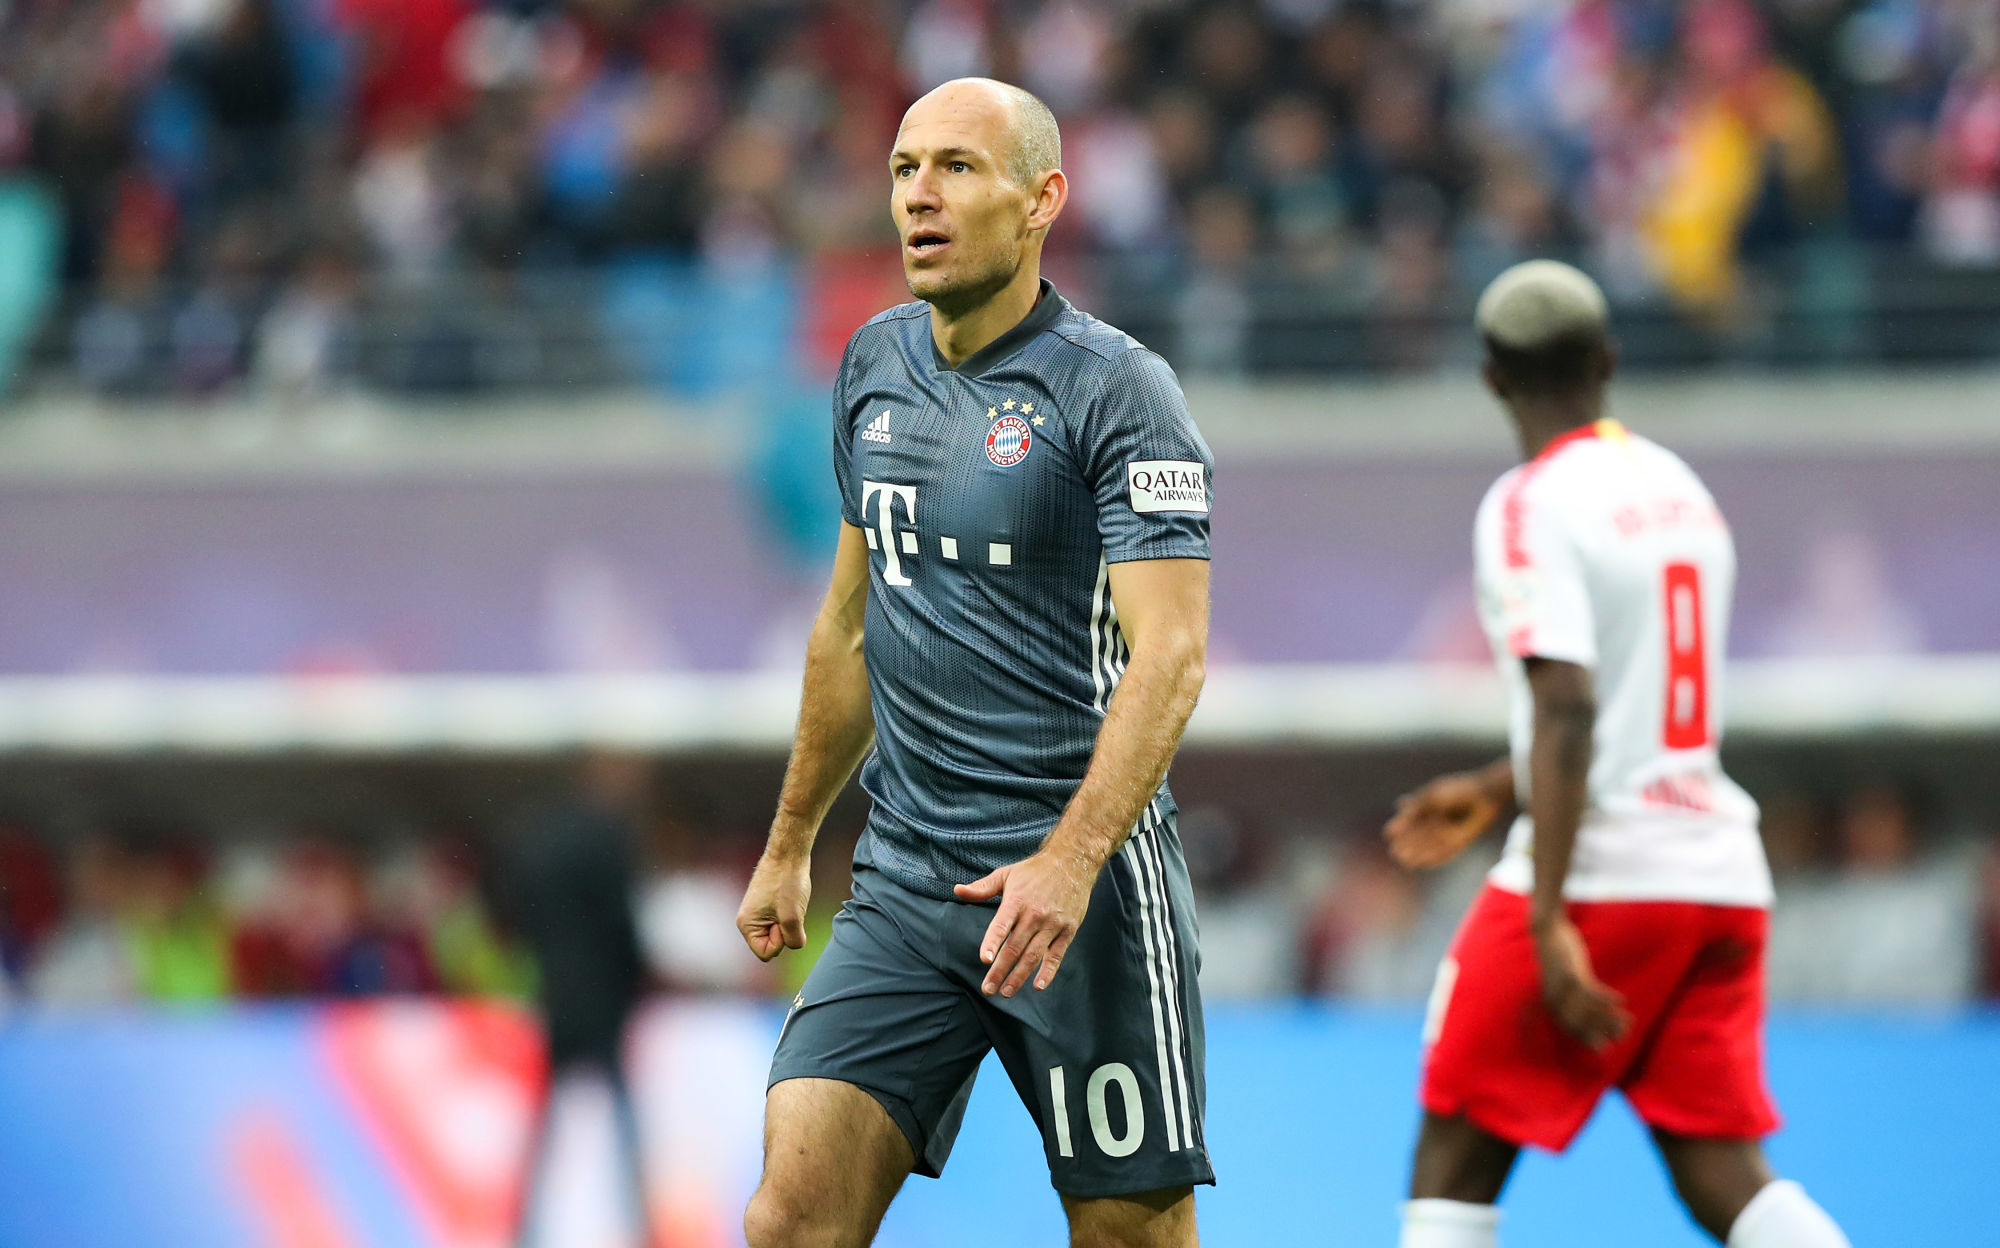 Arjen Robben during the Bundesliga match between RB Leizpig and Bayern Munchen on May 11th, 2019.
Photo : Firo / Icon Sport